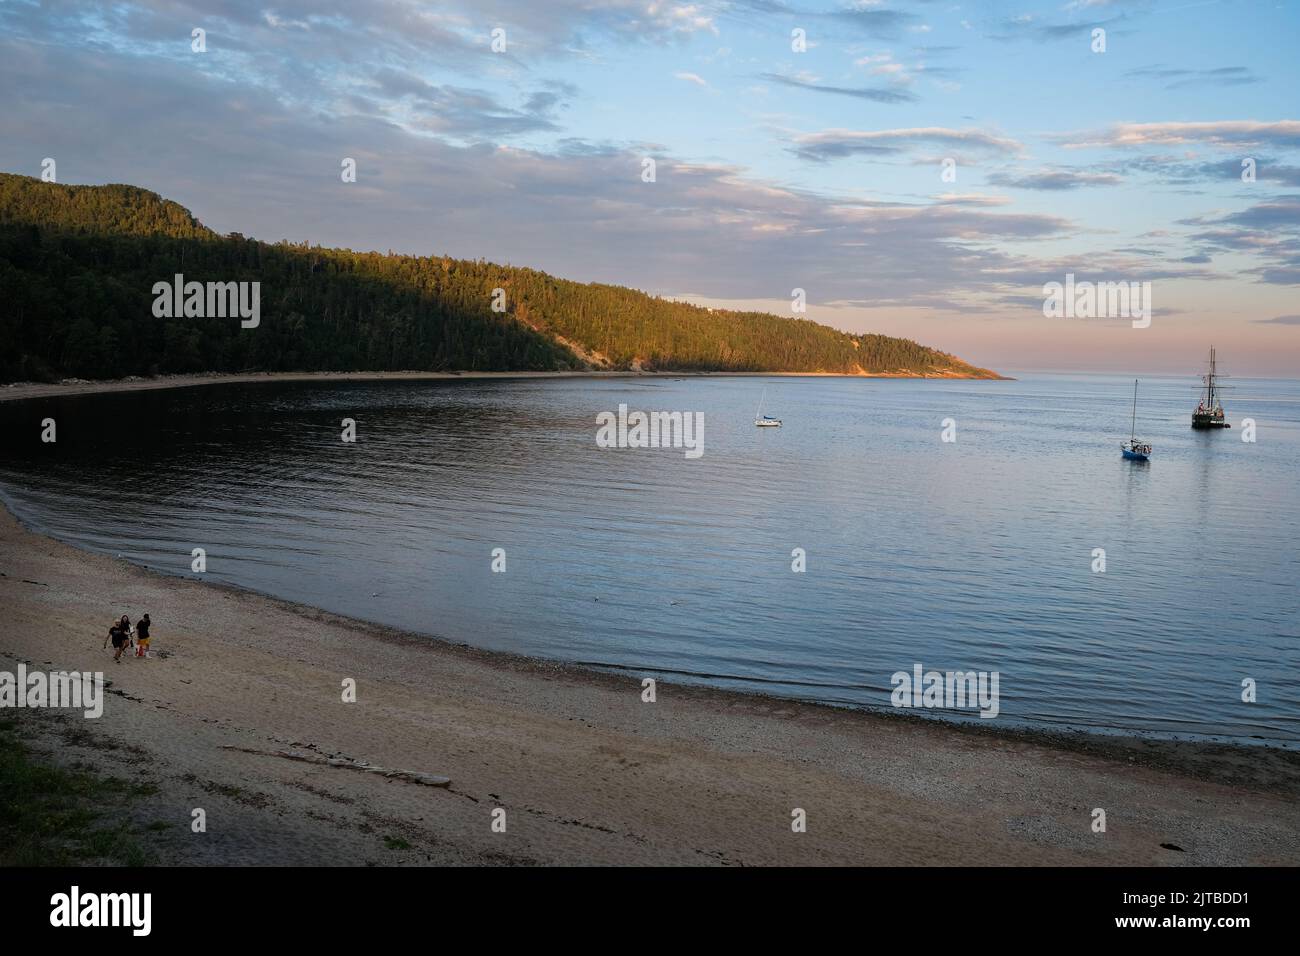 Harbor at Tadoussac, Quebec, Canada, on Quebec's Cote-Nord, north shore of the St. Lawrence river. Stock Photo